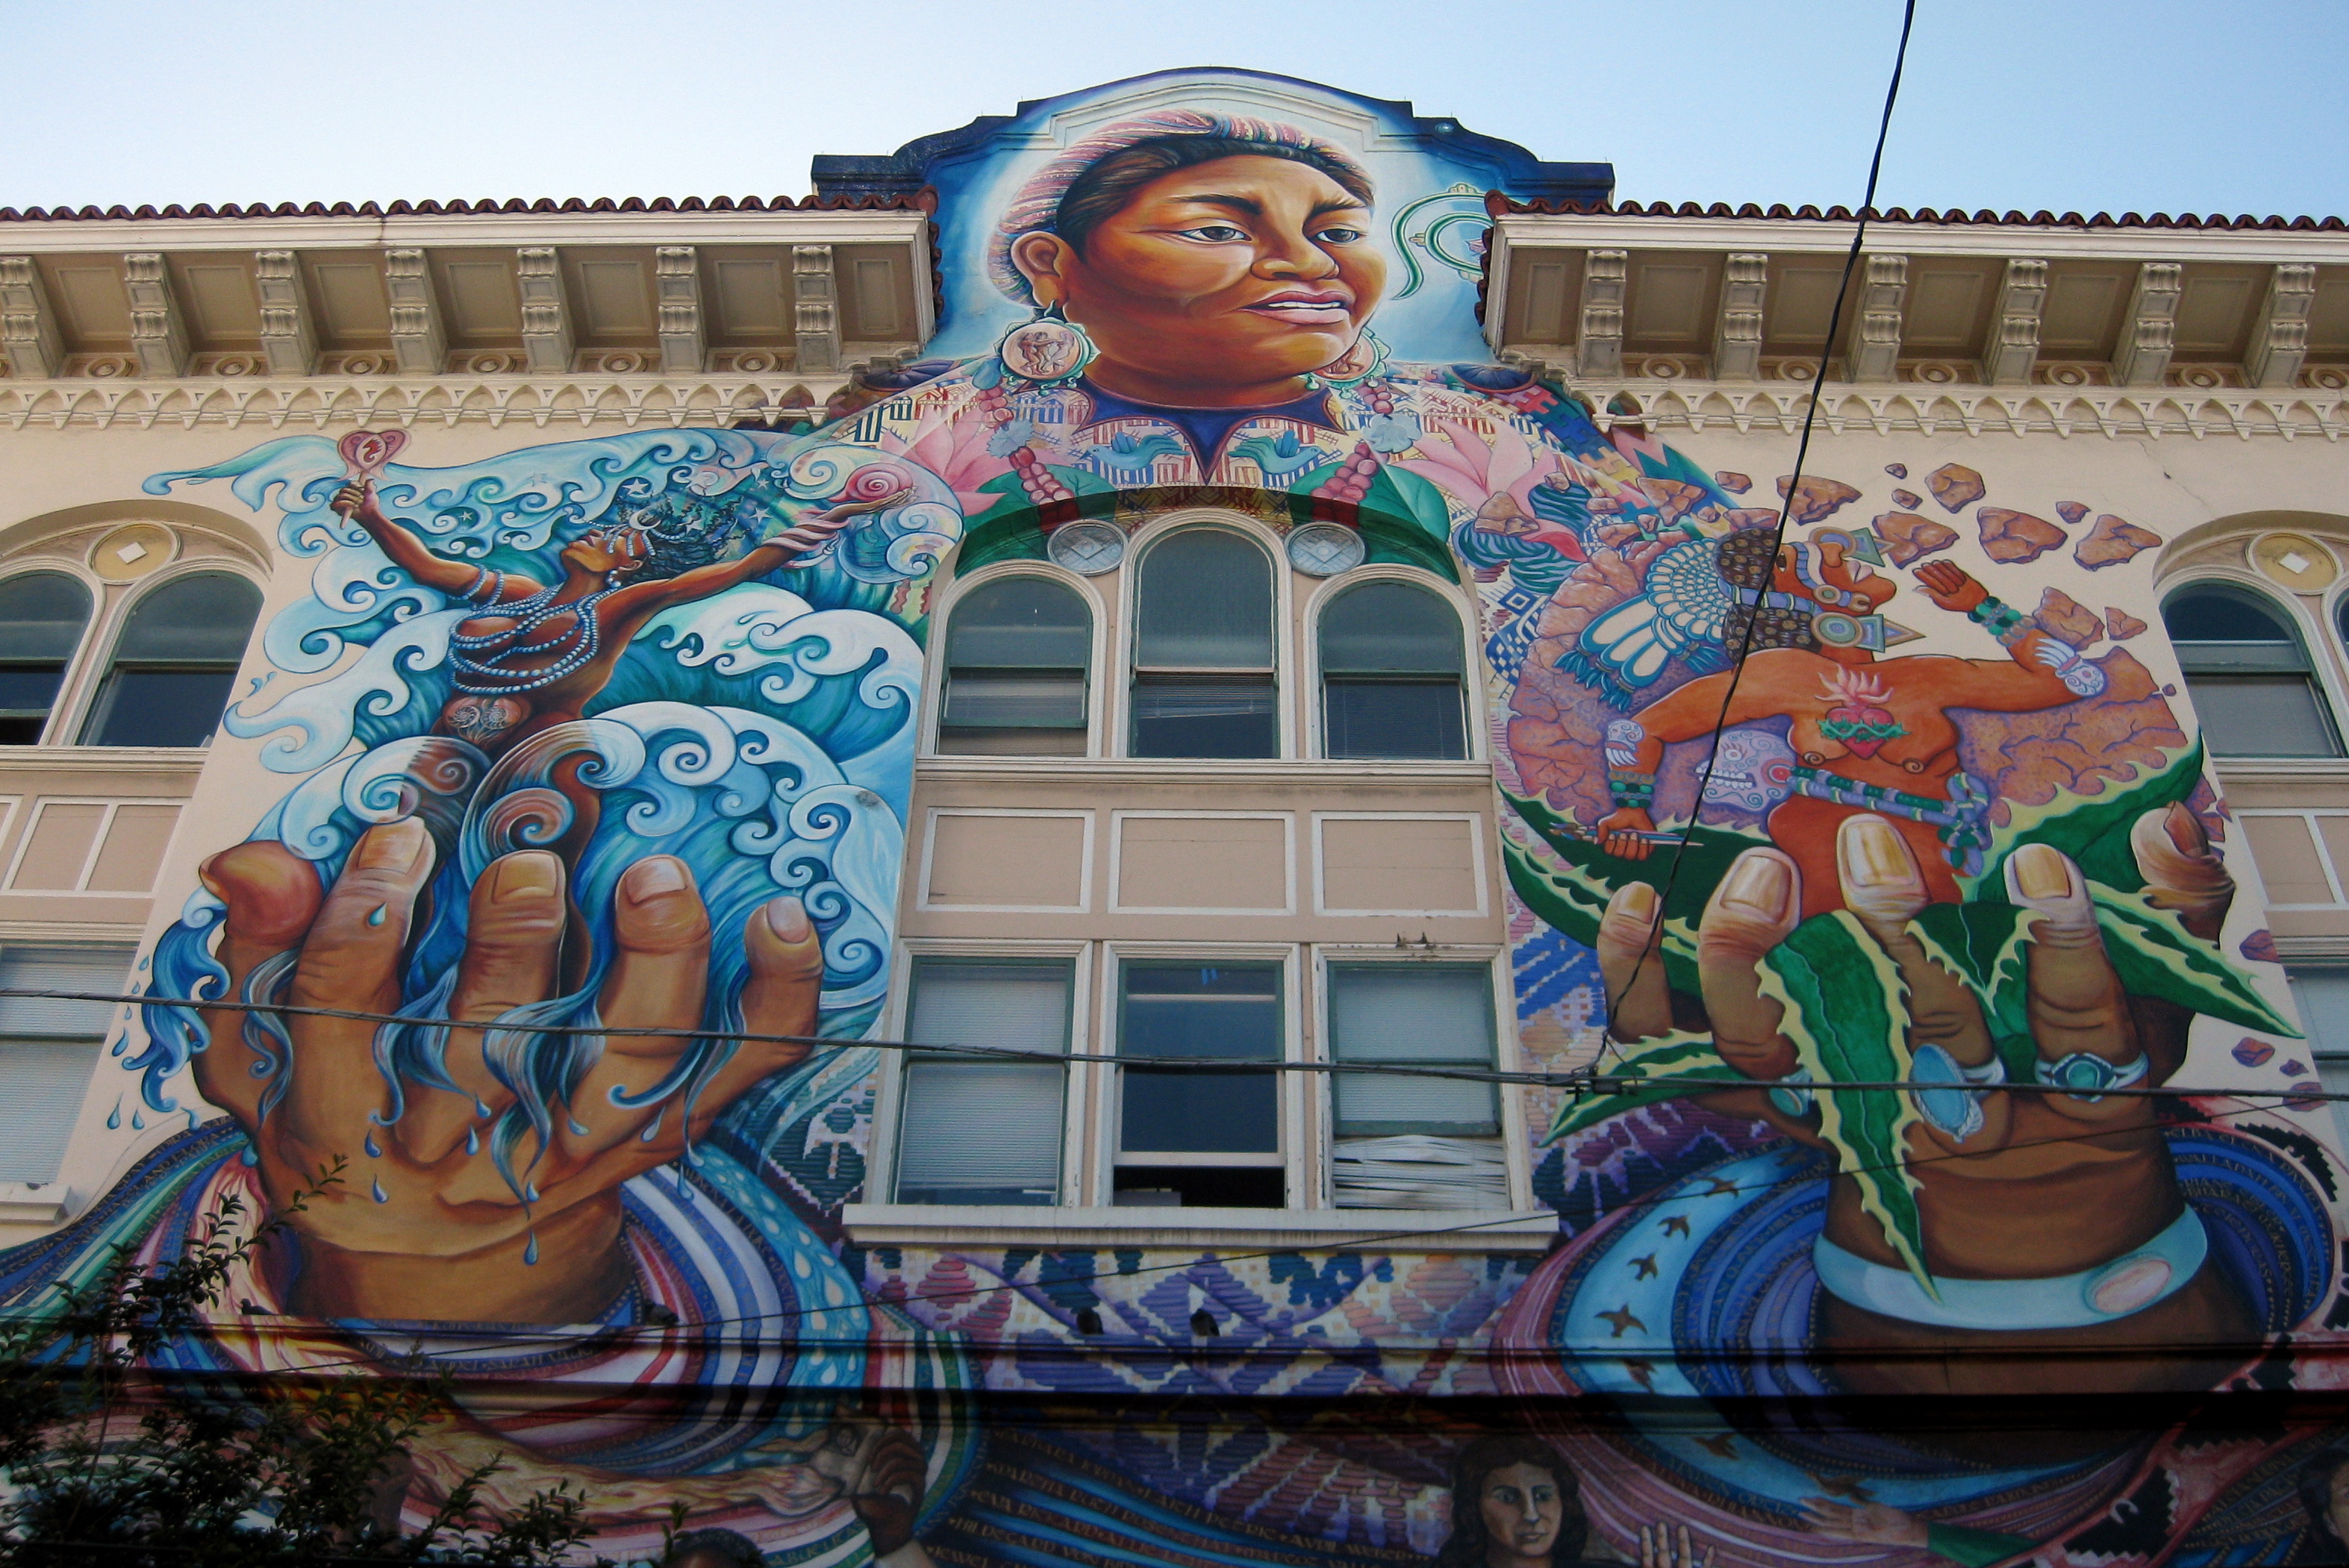 Colorful mural on a beige building with many windows featuring Rigoberta Menchu Tum holding Indigenous female deities Coyolxauhqui and Yemeyah, one in each of her oversized hands. 